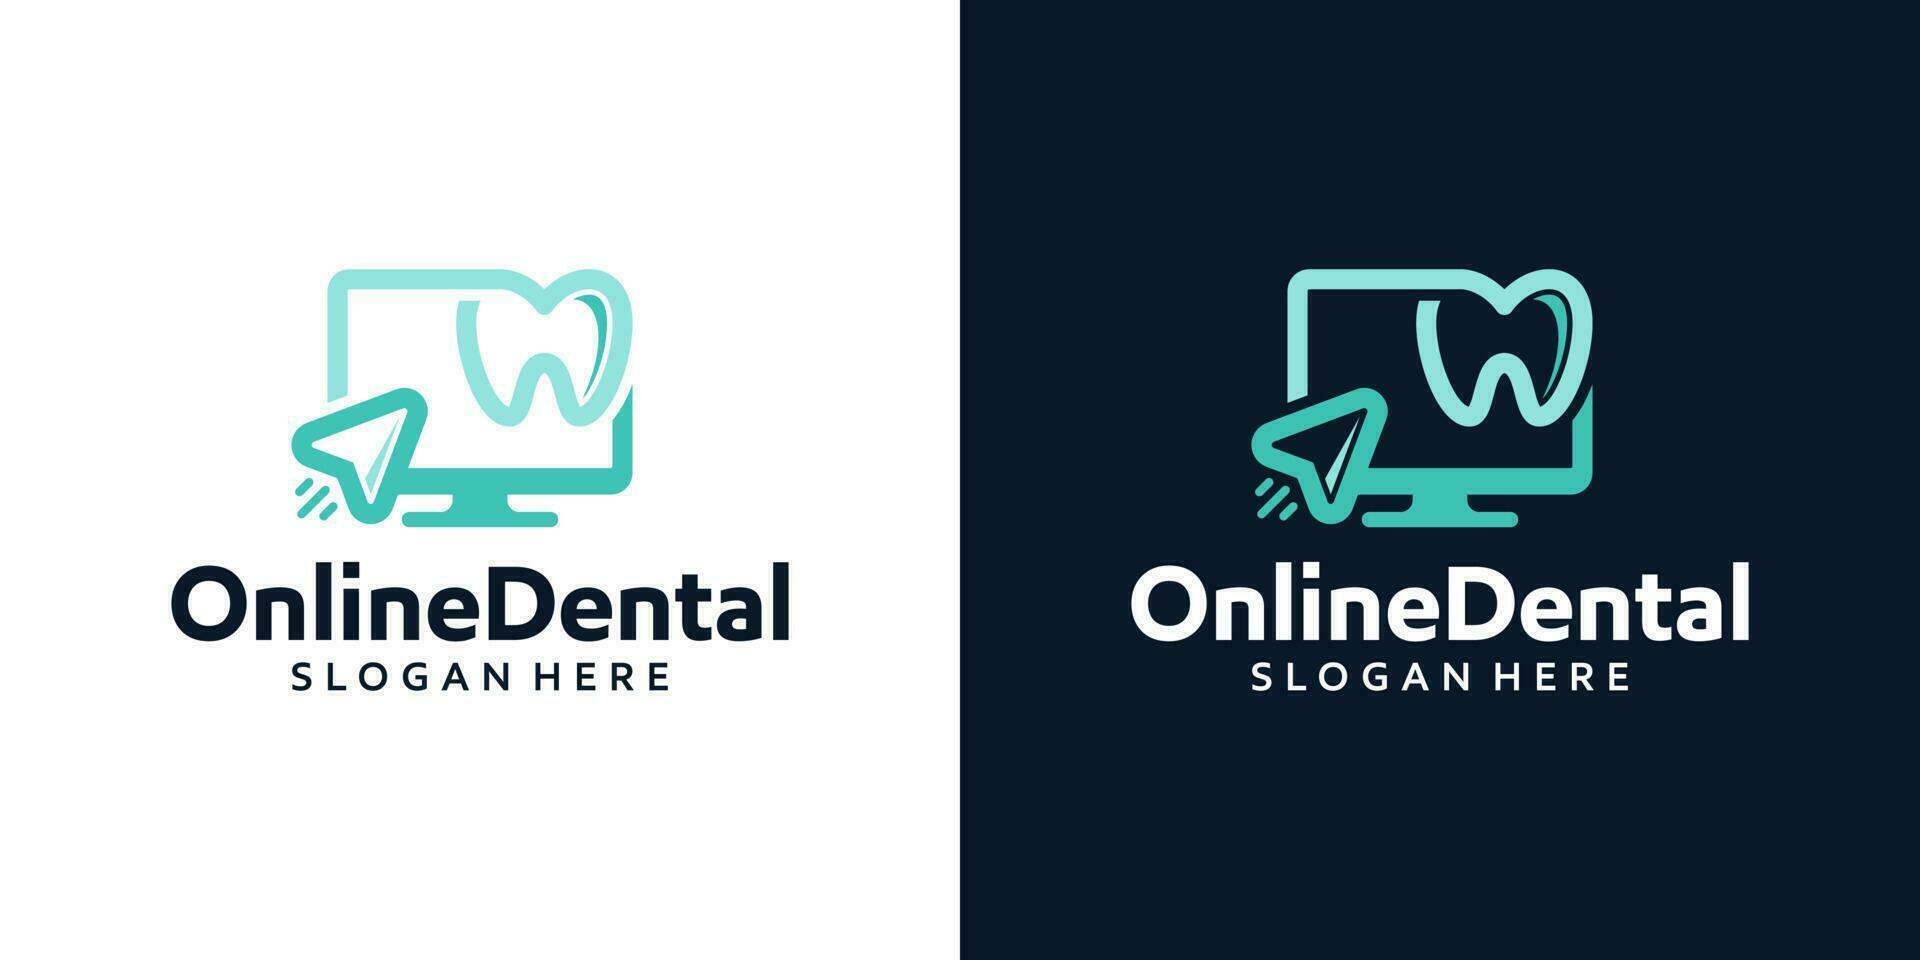 Dental clinic online logo design template. Dental logo with click and monitor graphic design vector illustration. Symbol, icon, creative.